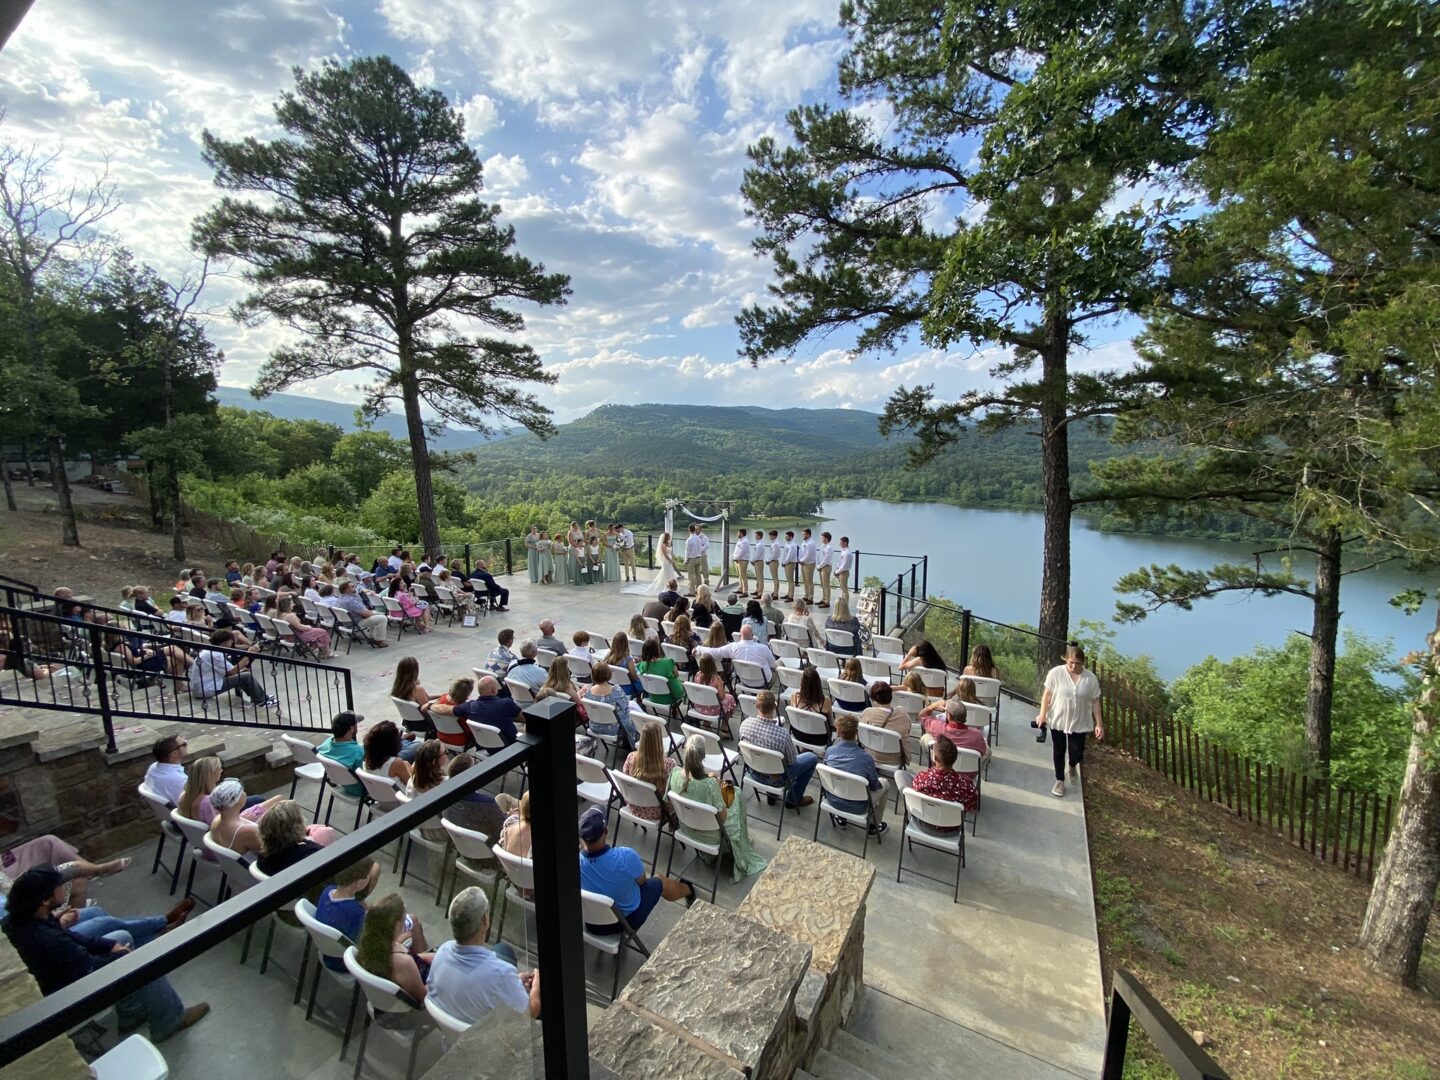 A crowd of people sitting on steps near water.